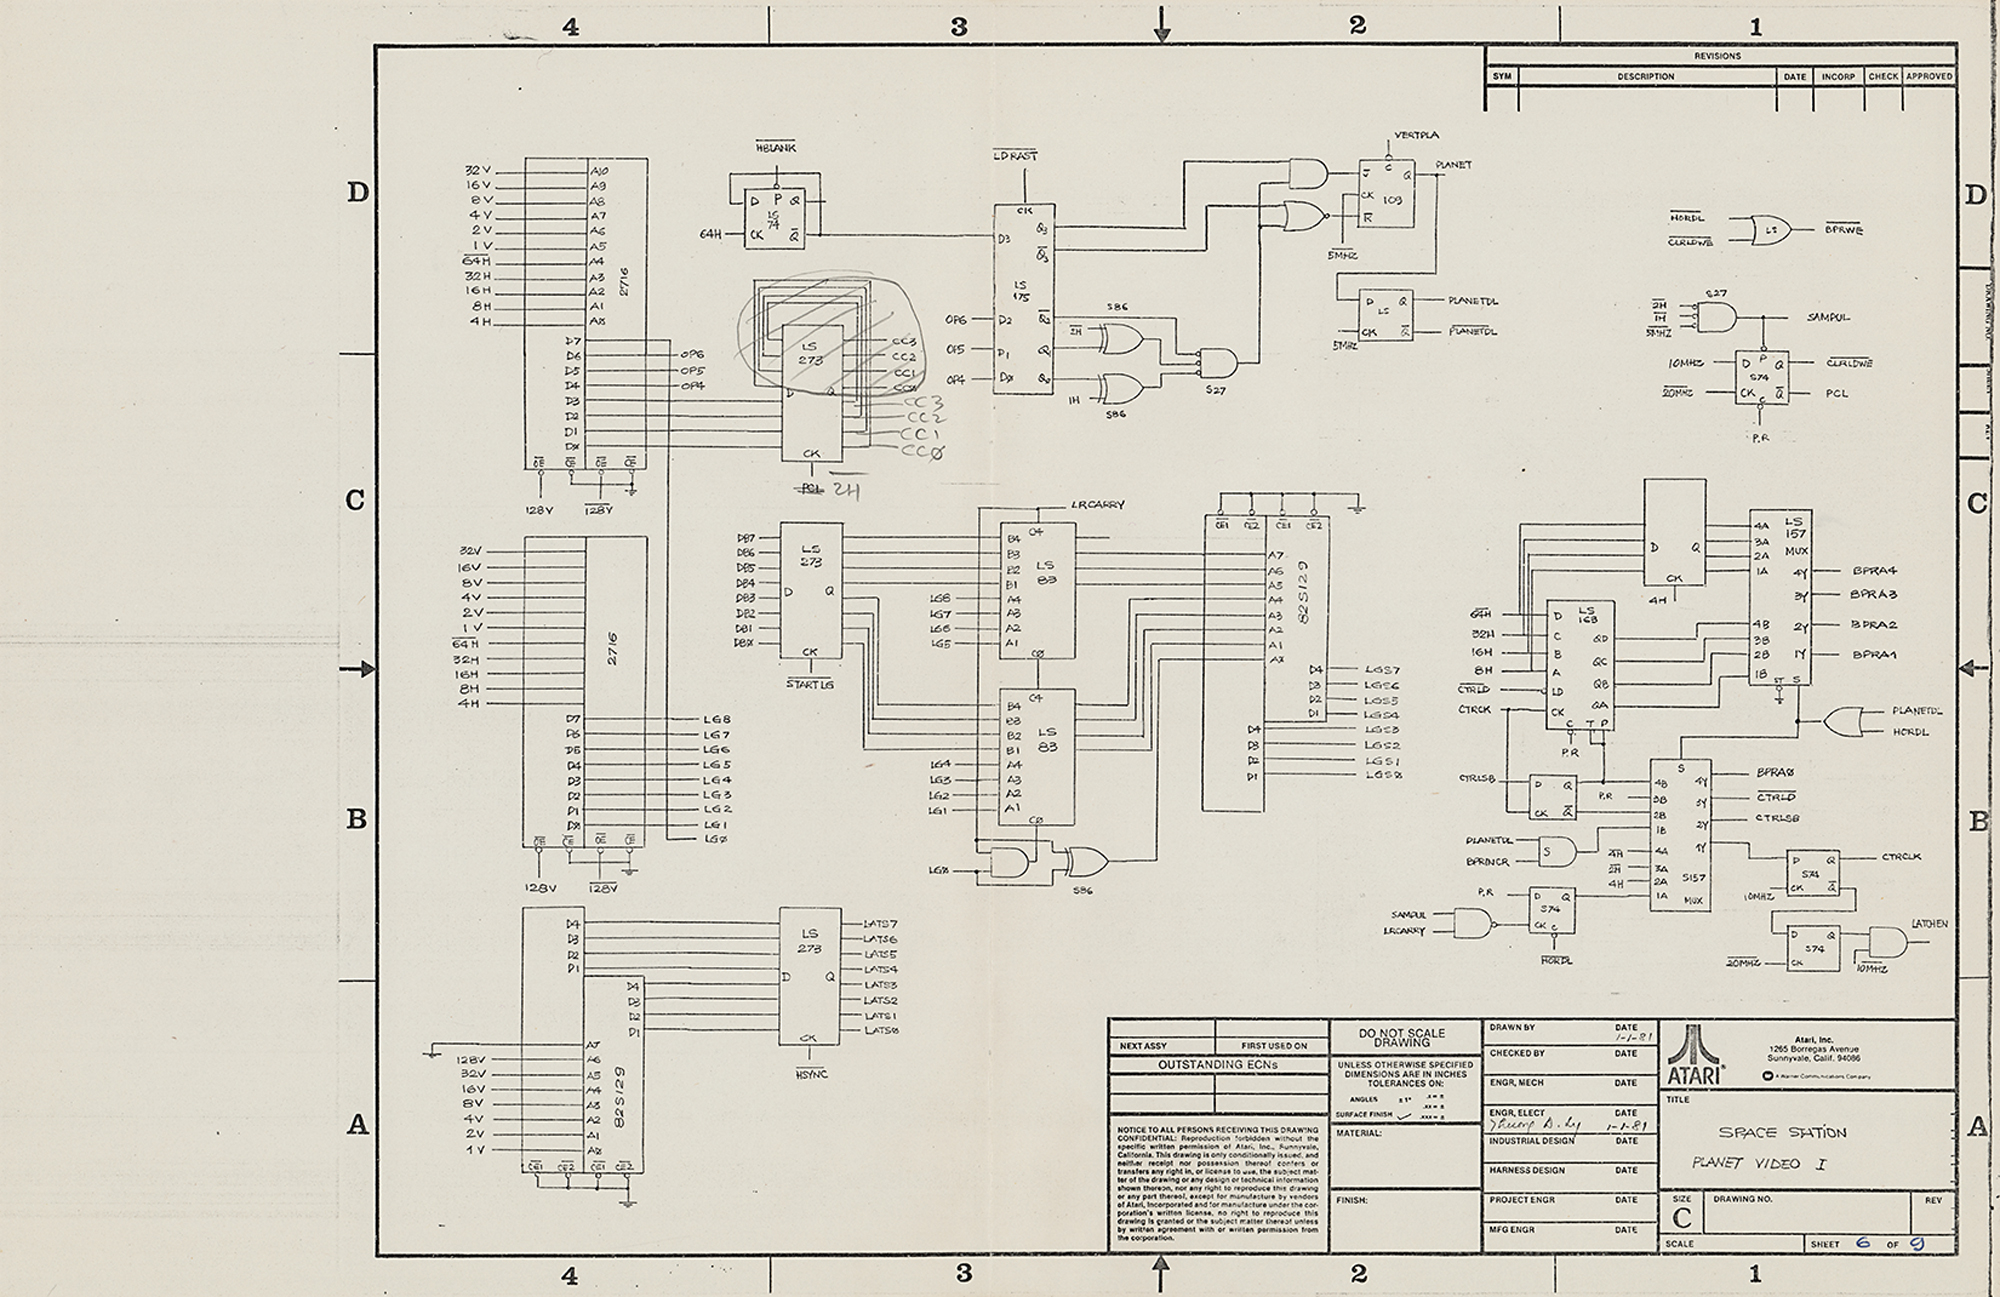 Lot #318 Atari: Space Station / Liberator Prototype Schematics (circa 1981) from the collection of David Sherman